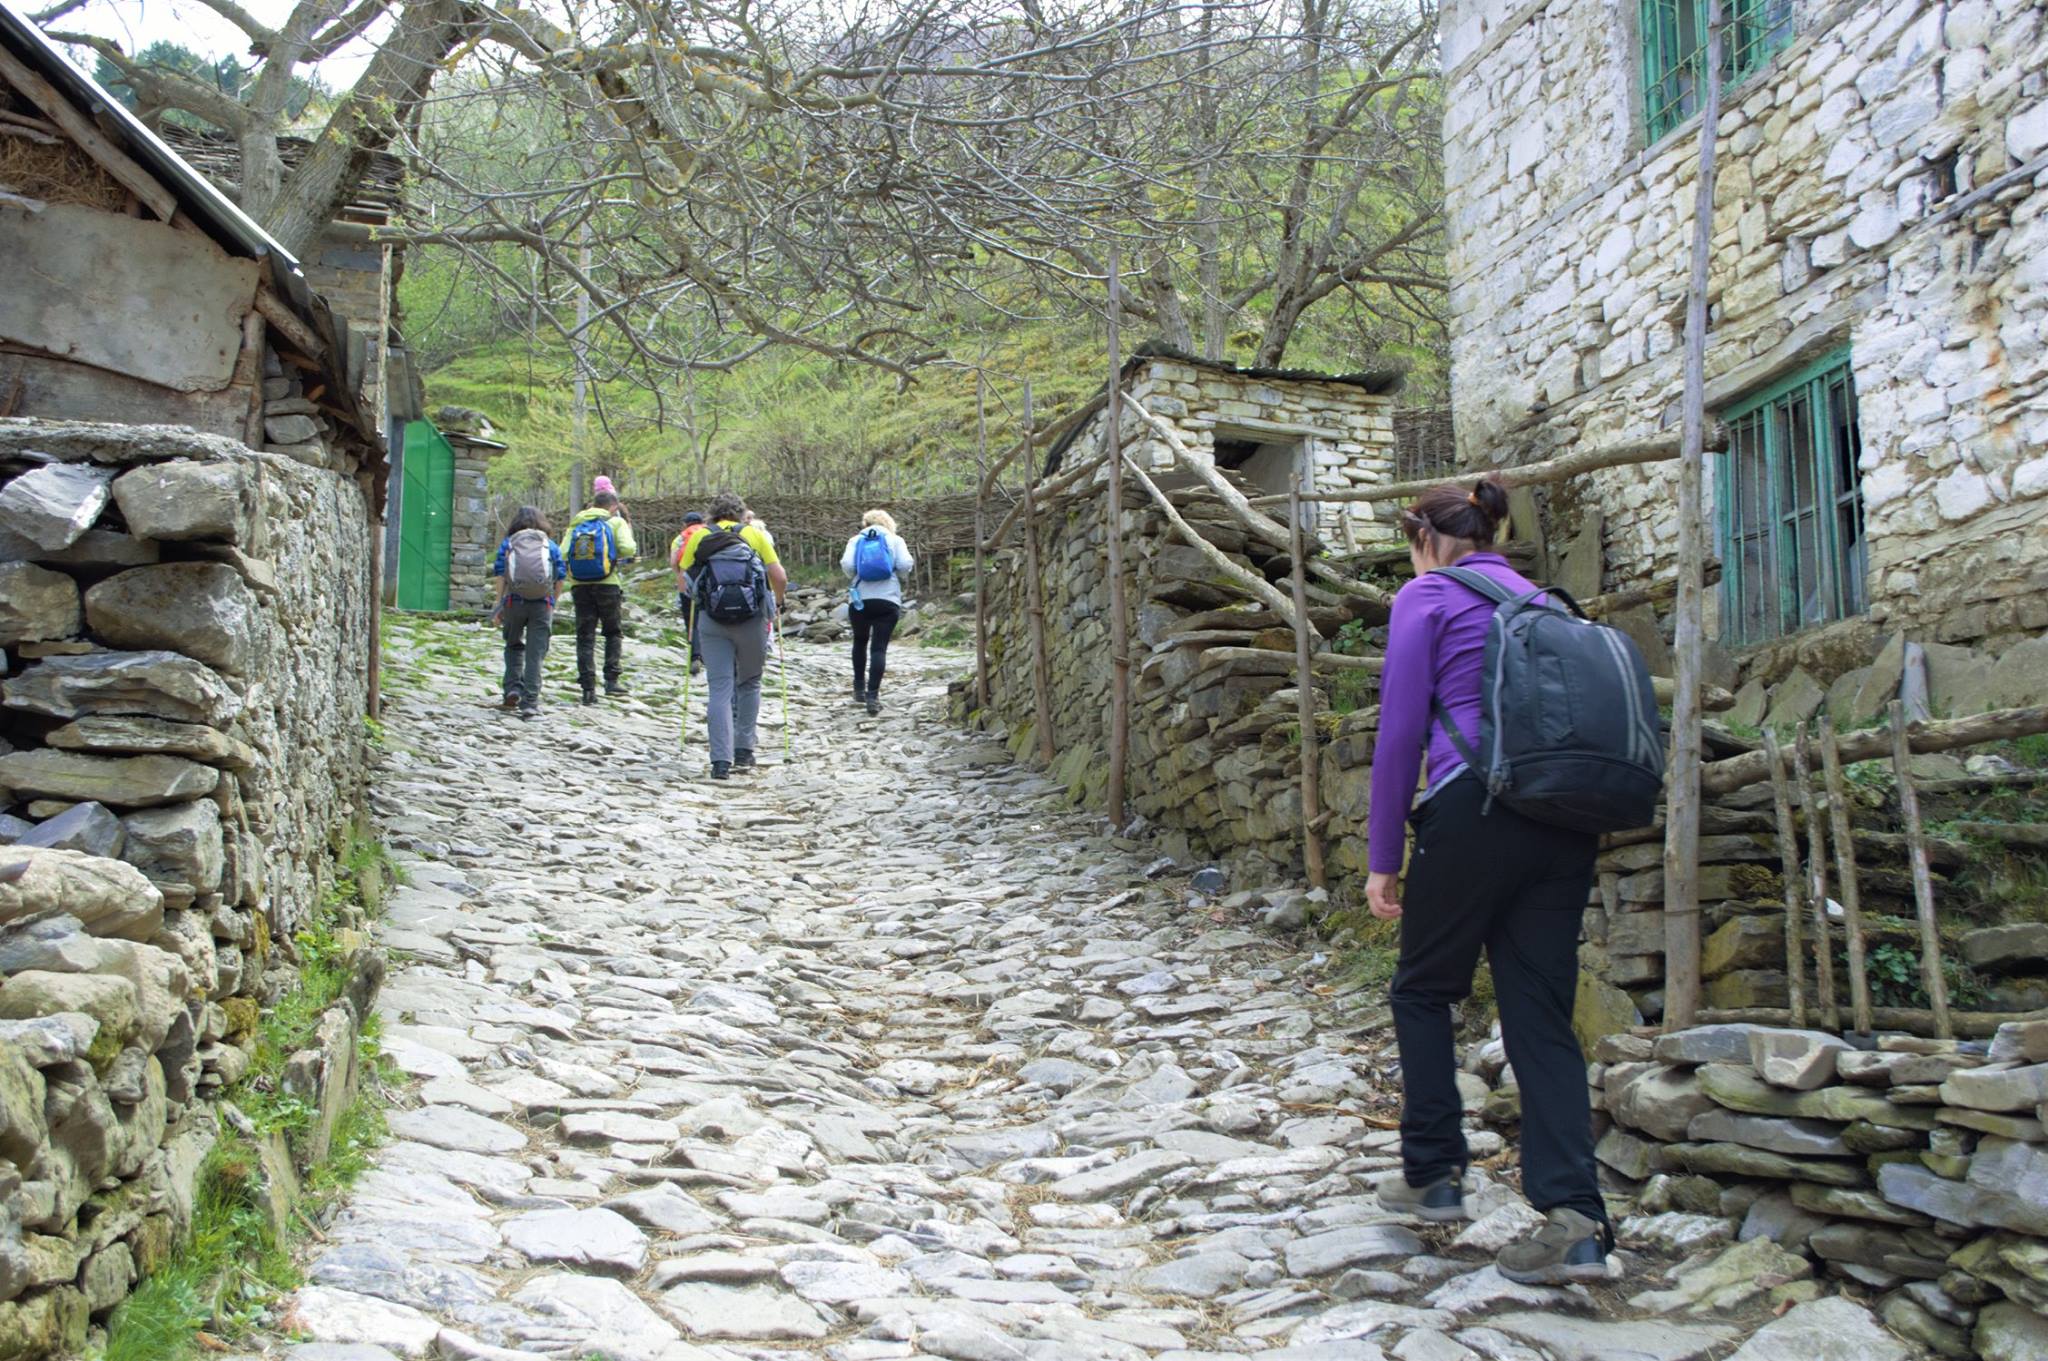 Hikers walk up the cobbled lane of a village in the Balkans